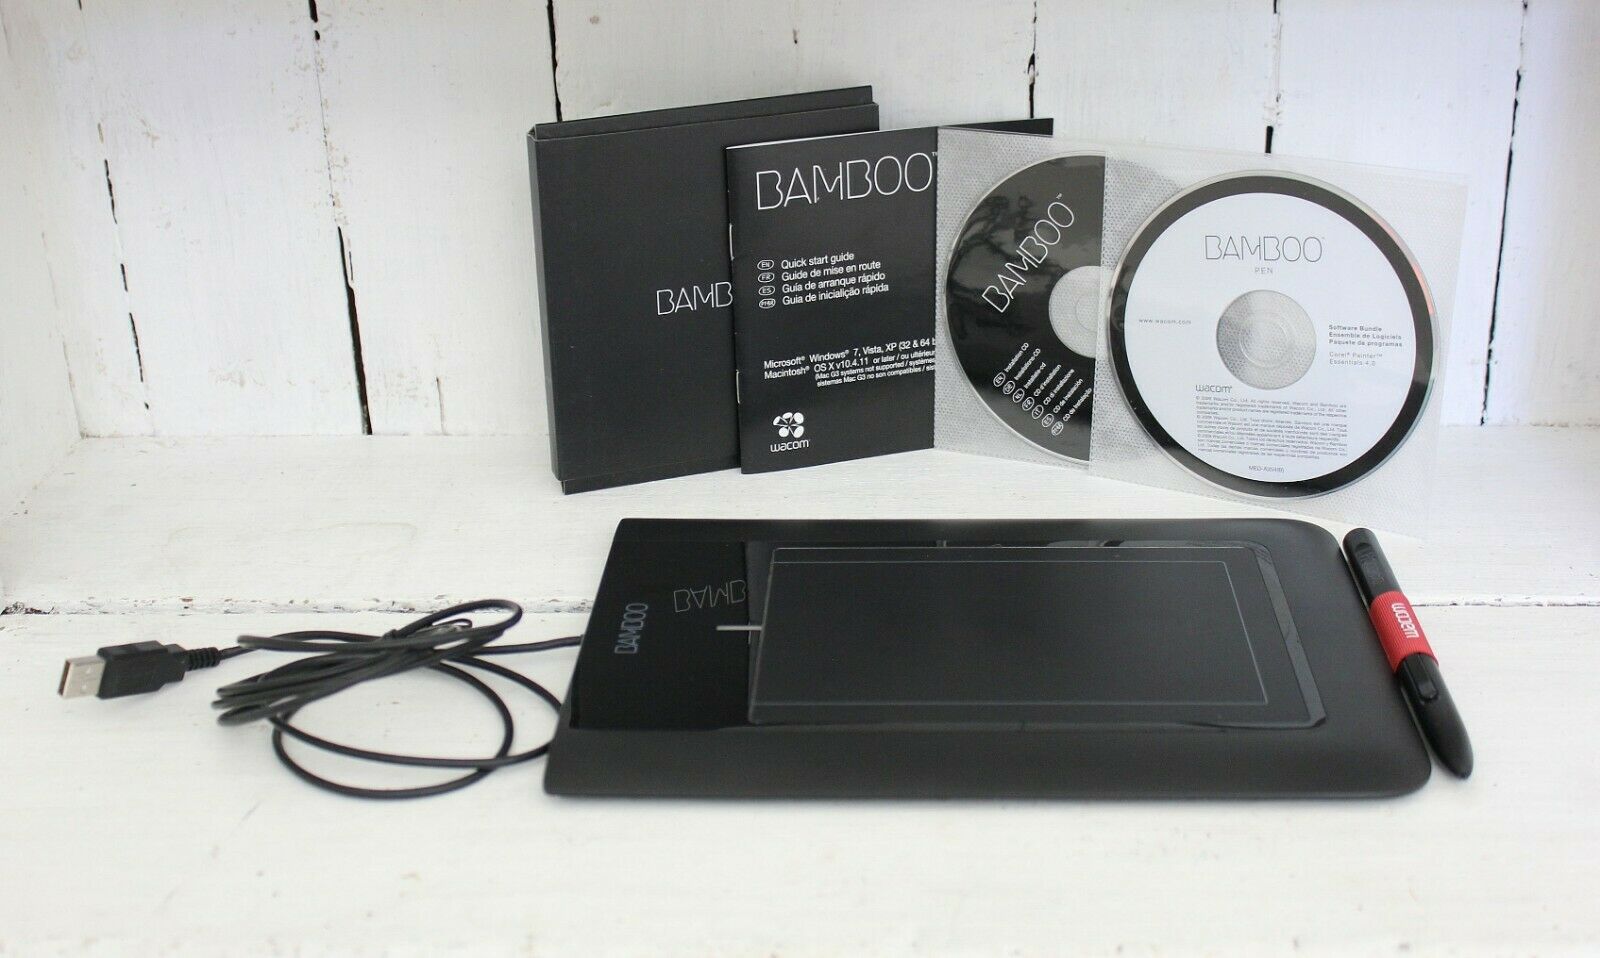 Wacom CTL-460 Black Bamboo Drawing Tablet with Pen and Driver Discs